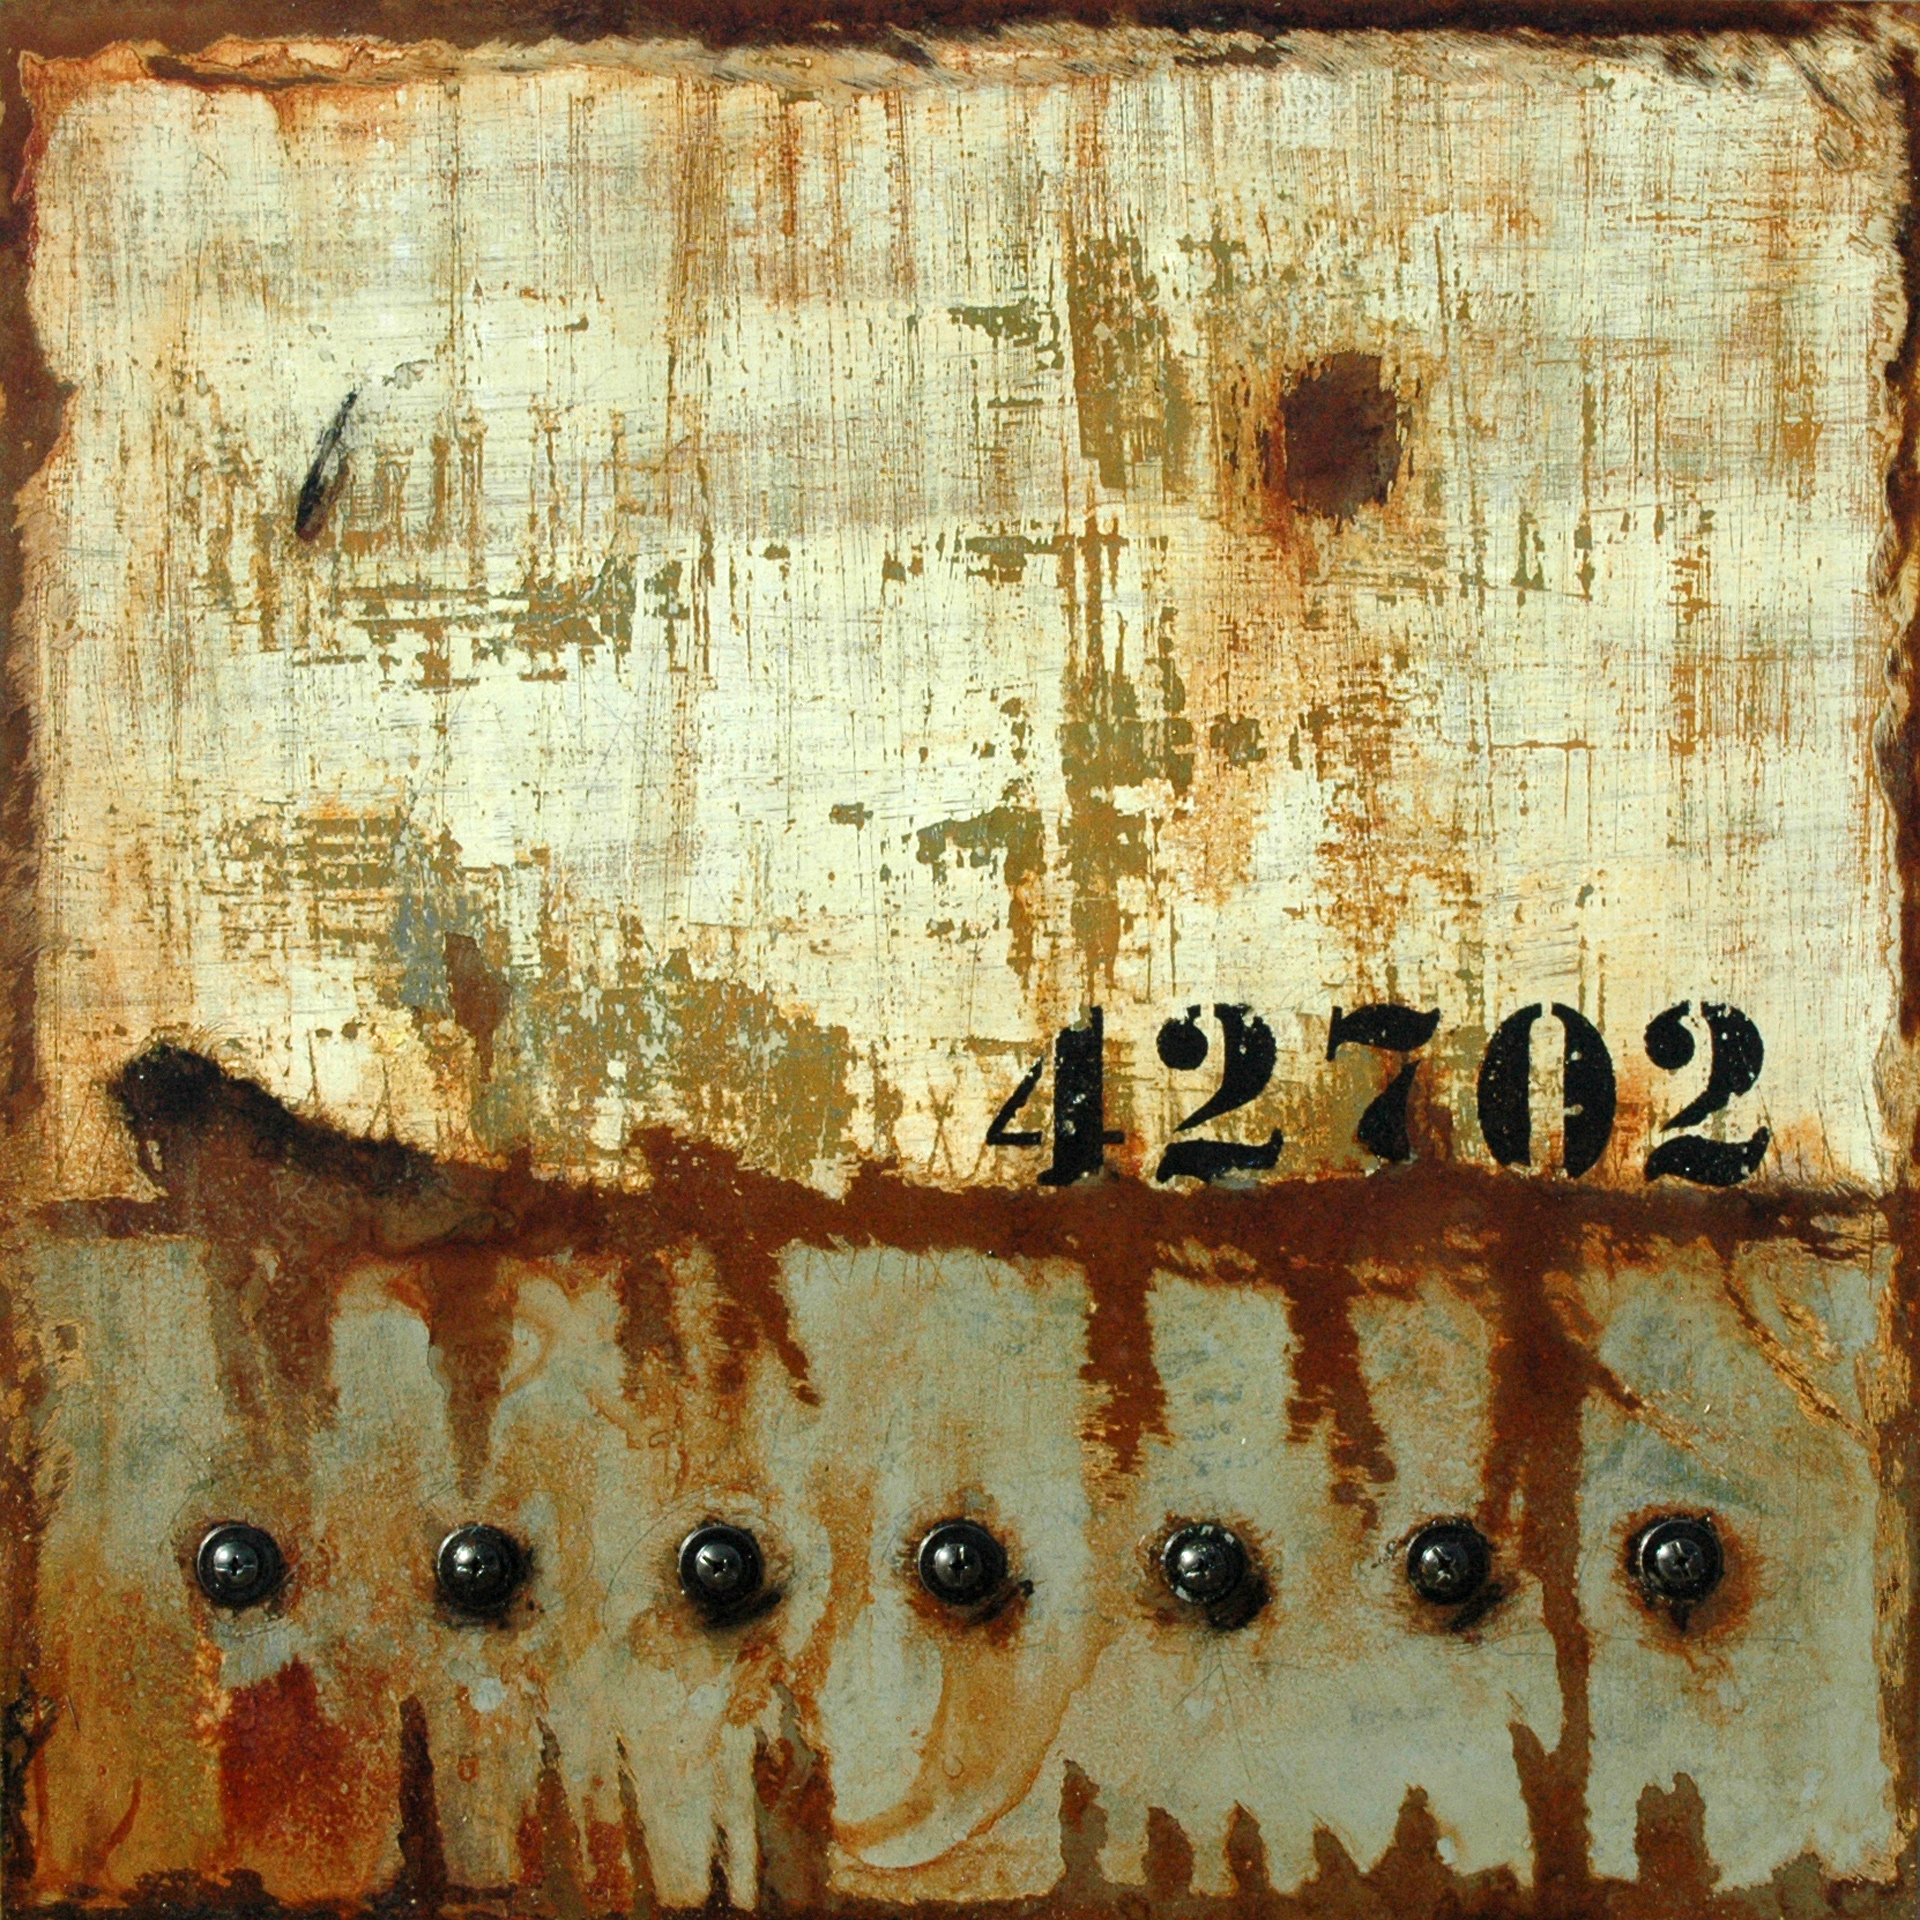 Markings: 42702 - Industrial themed mixed media art by Domenick Naccarato